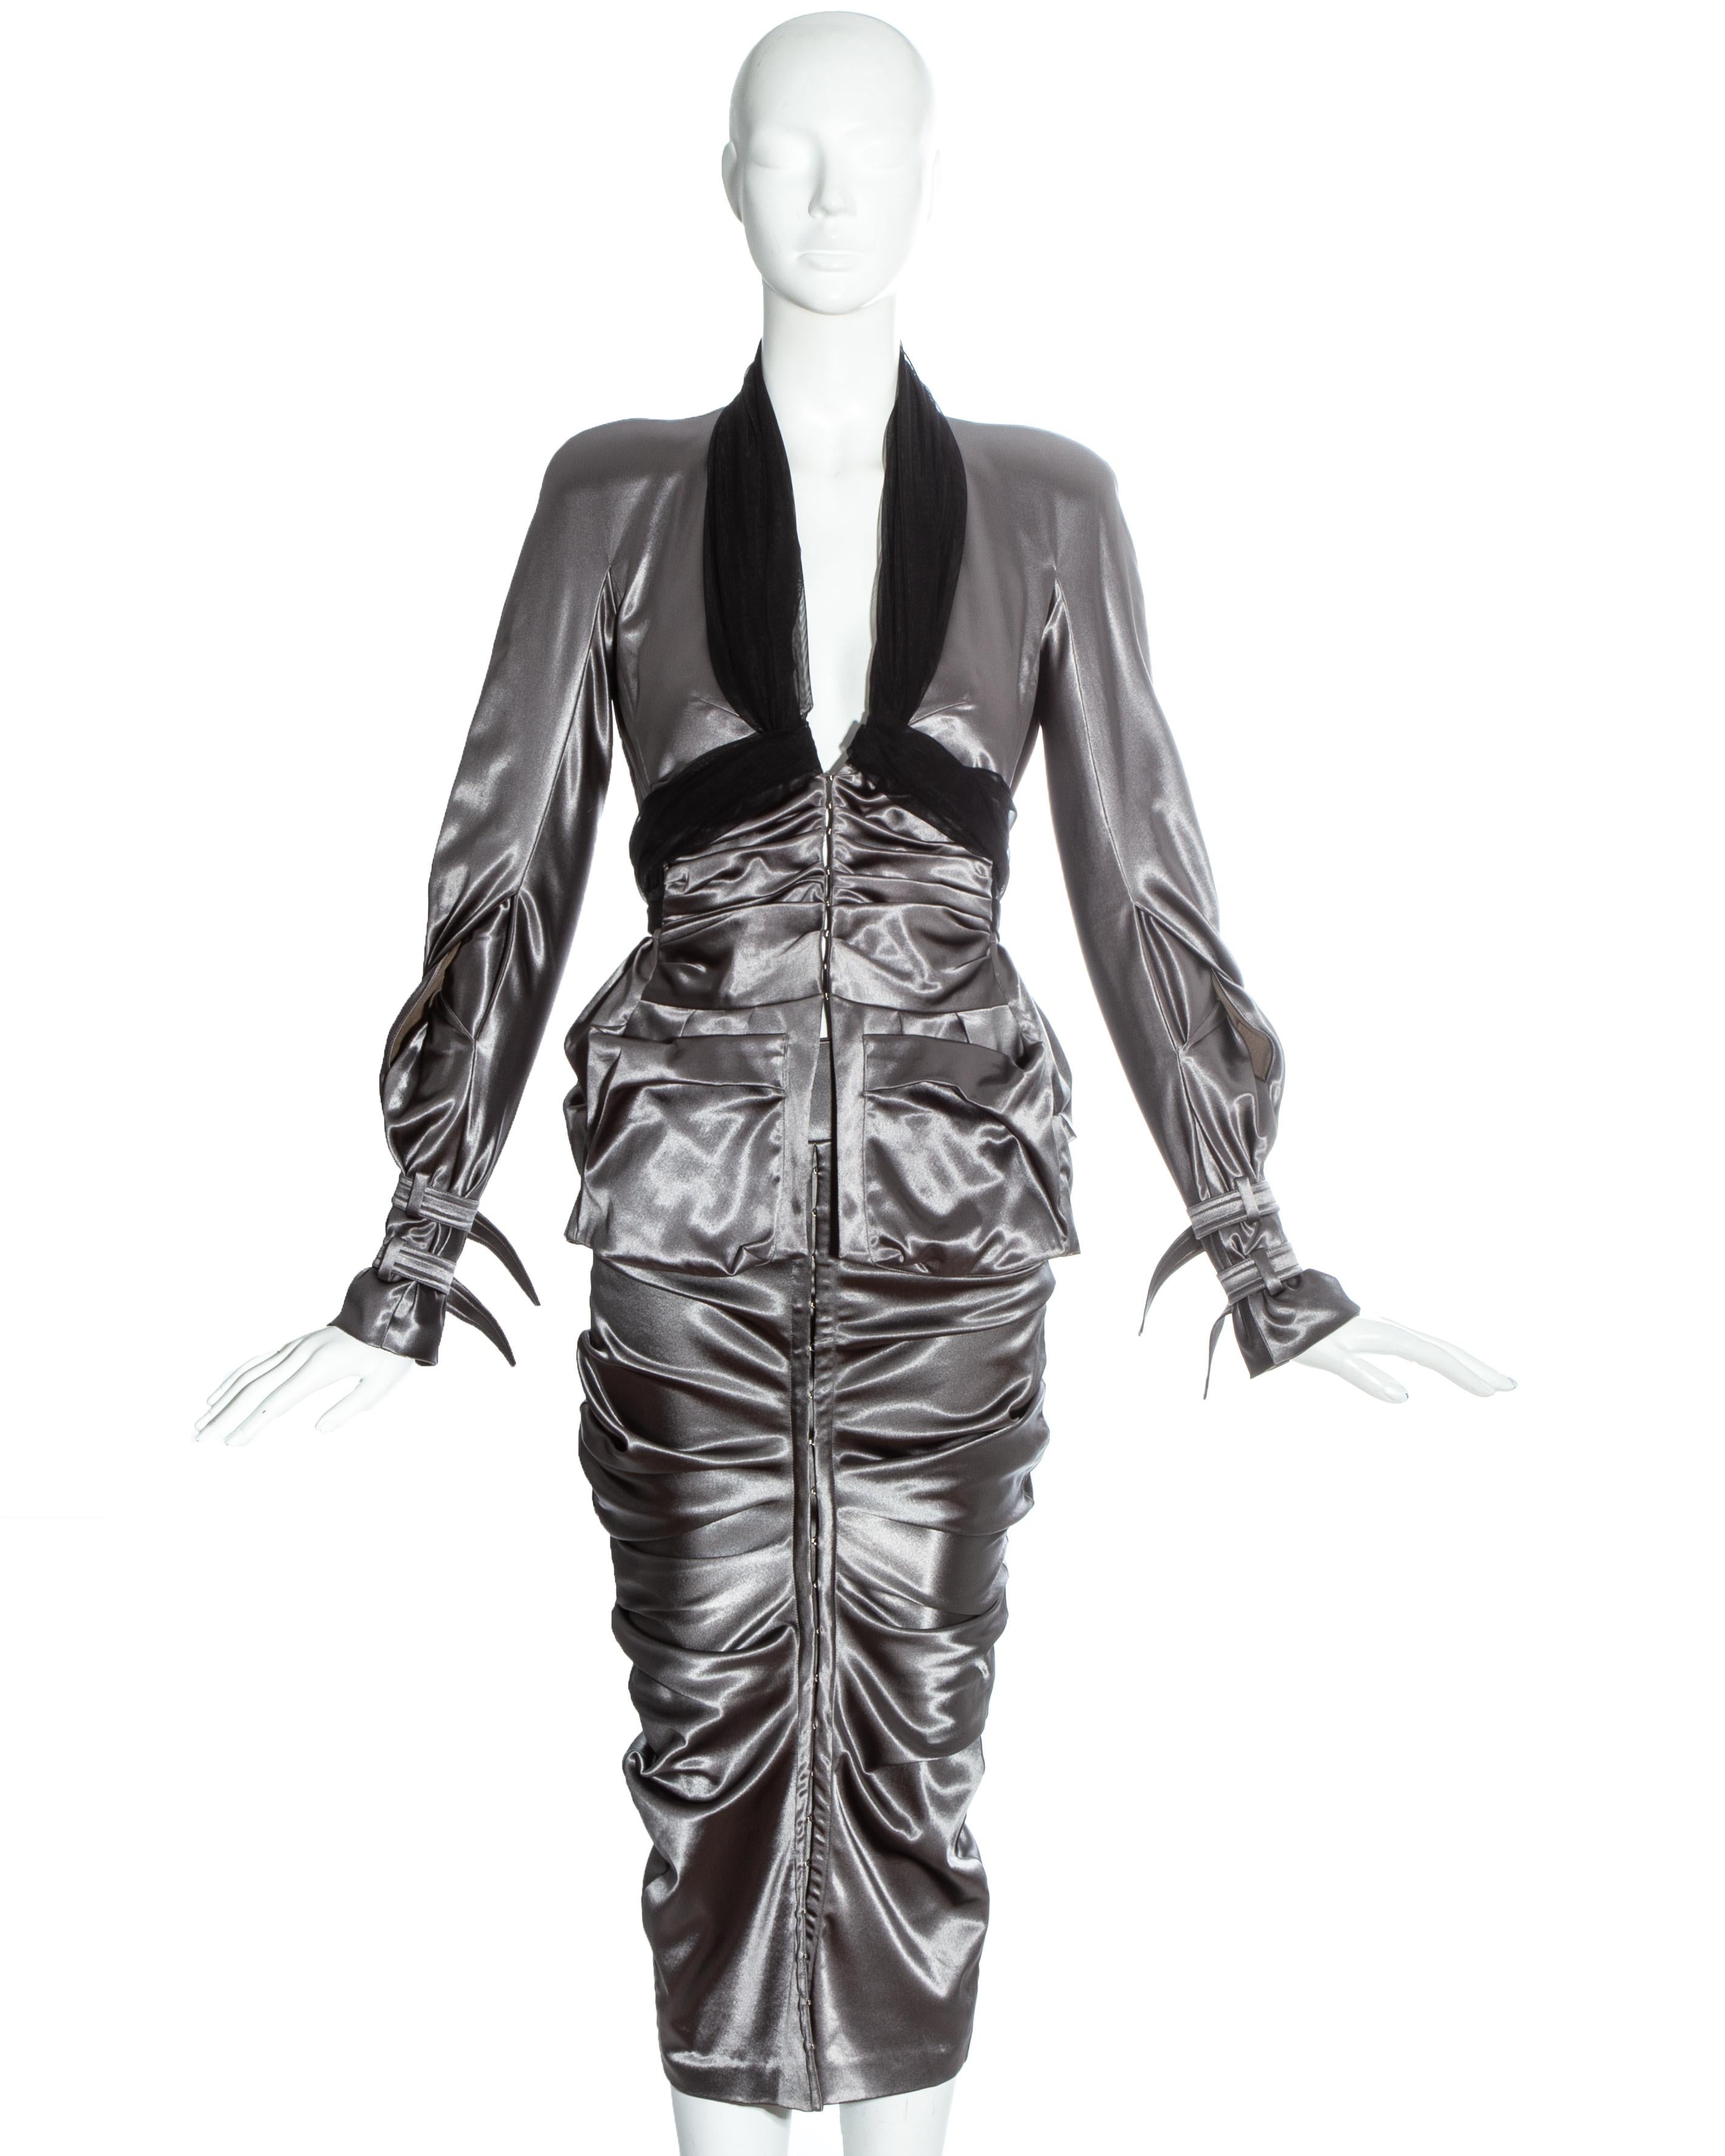 Christian Dior by John Galliano gunmetal grey skirt suit. Ruched jacket with black tulle halter neck, buckled cuffs, twisted sleeves, padded shoulders and corset style metal hook fastenings. Fitted skirt with ruching around hips and matching metal